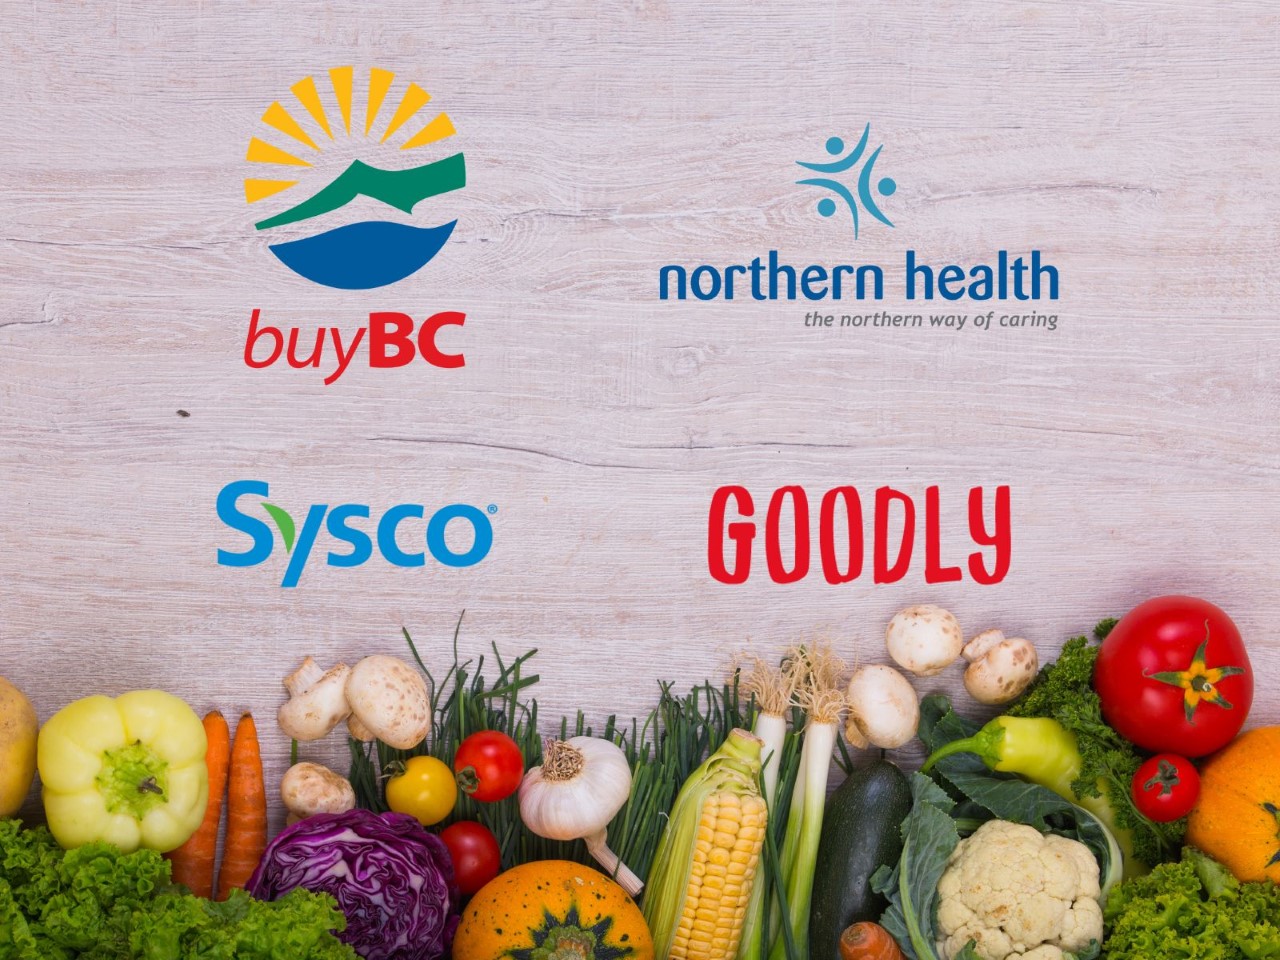 https://goodly.ca/wp-content/uploads/2023/01/Goodly_Northern_Health.jpg